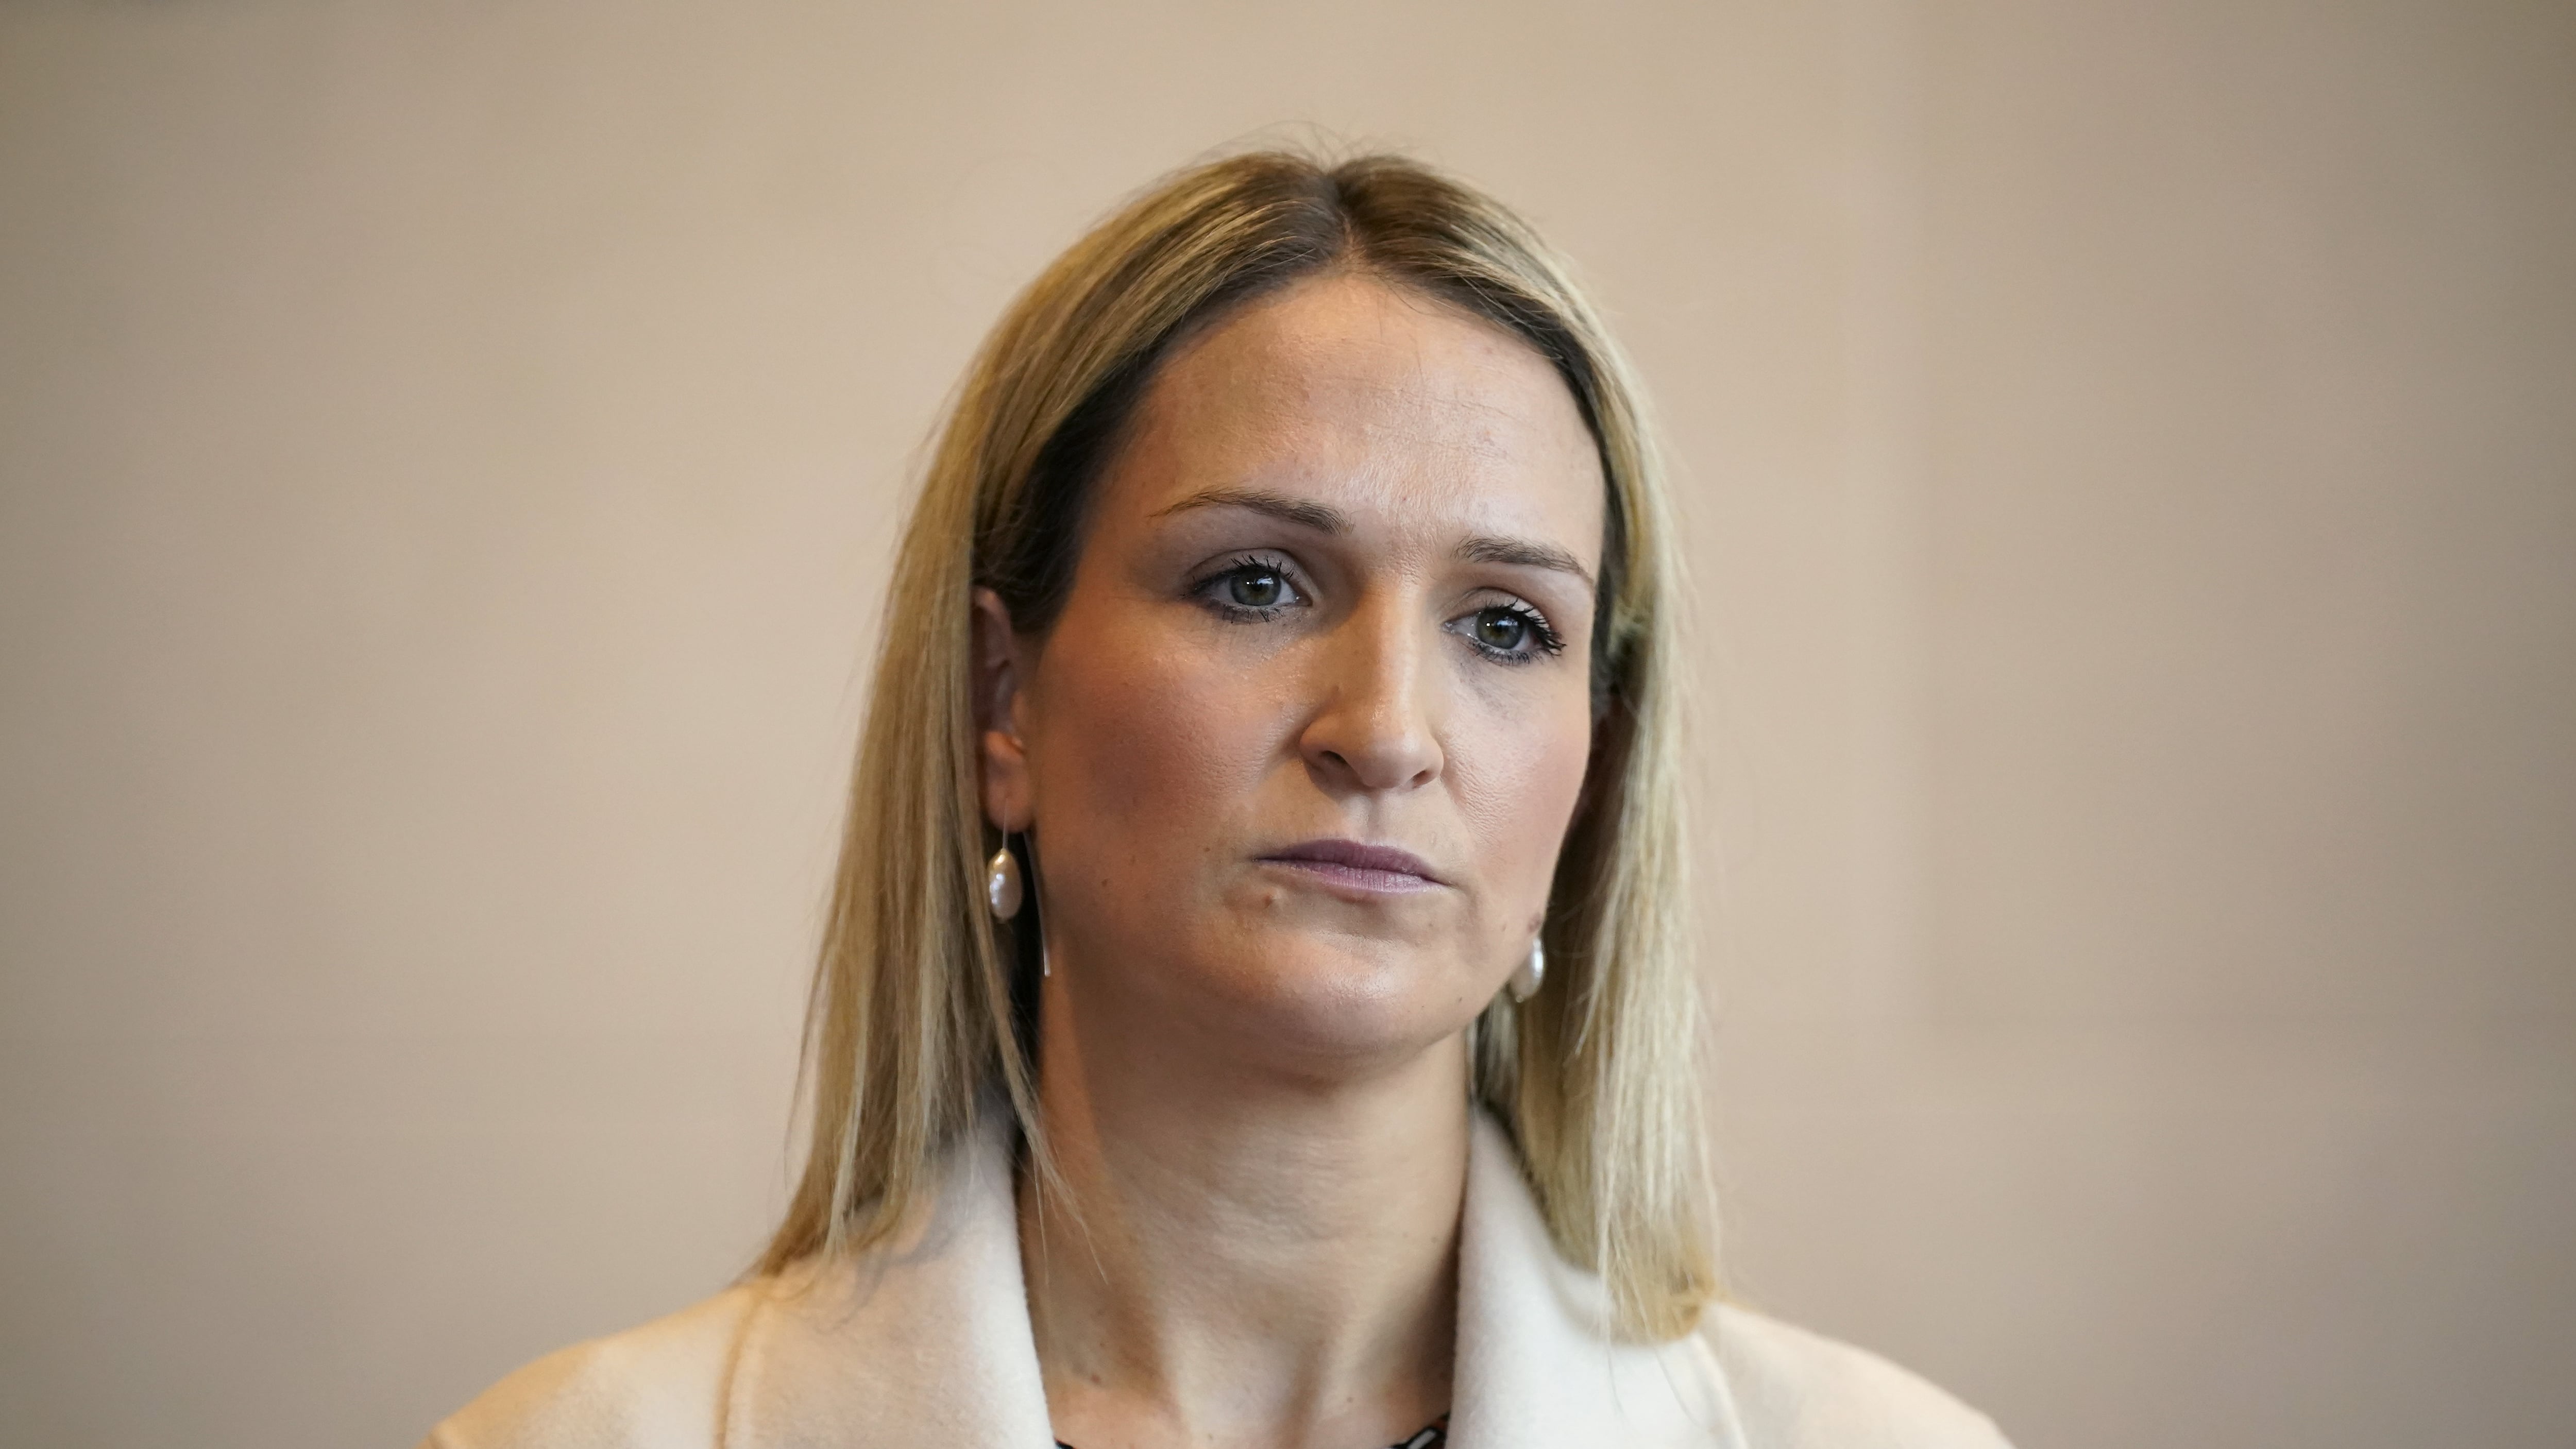 Helen McEntee said any support would be provided on a correct legal basis